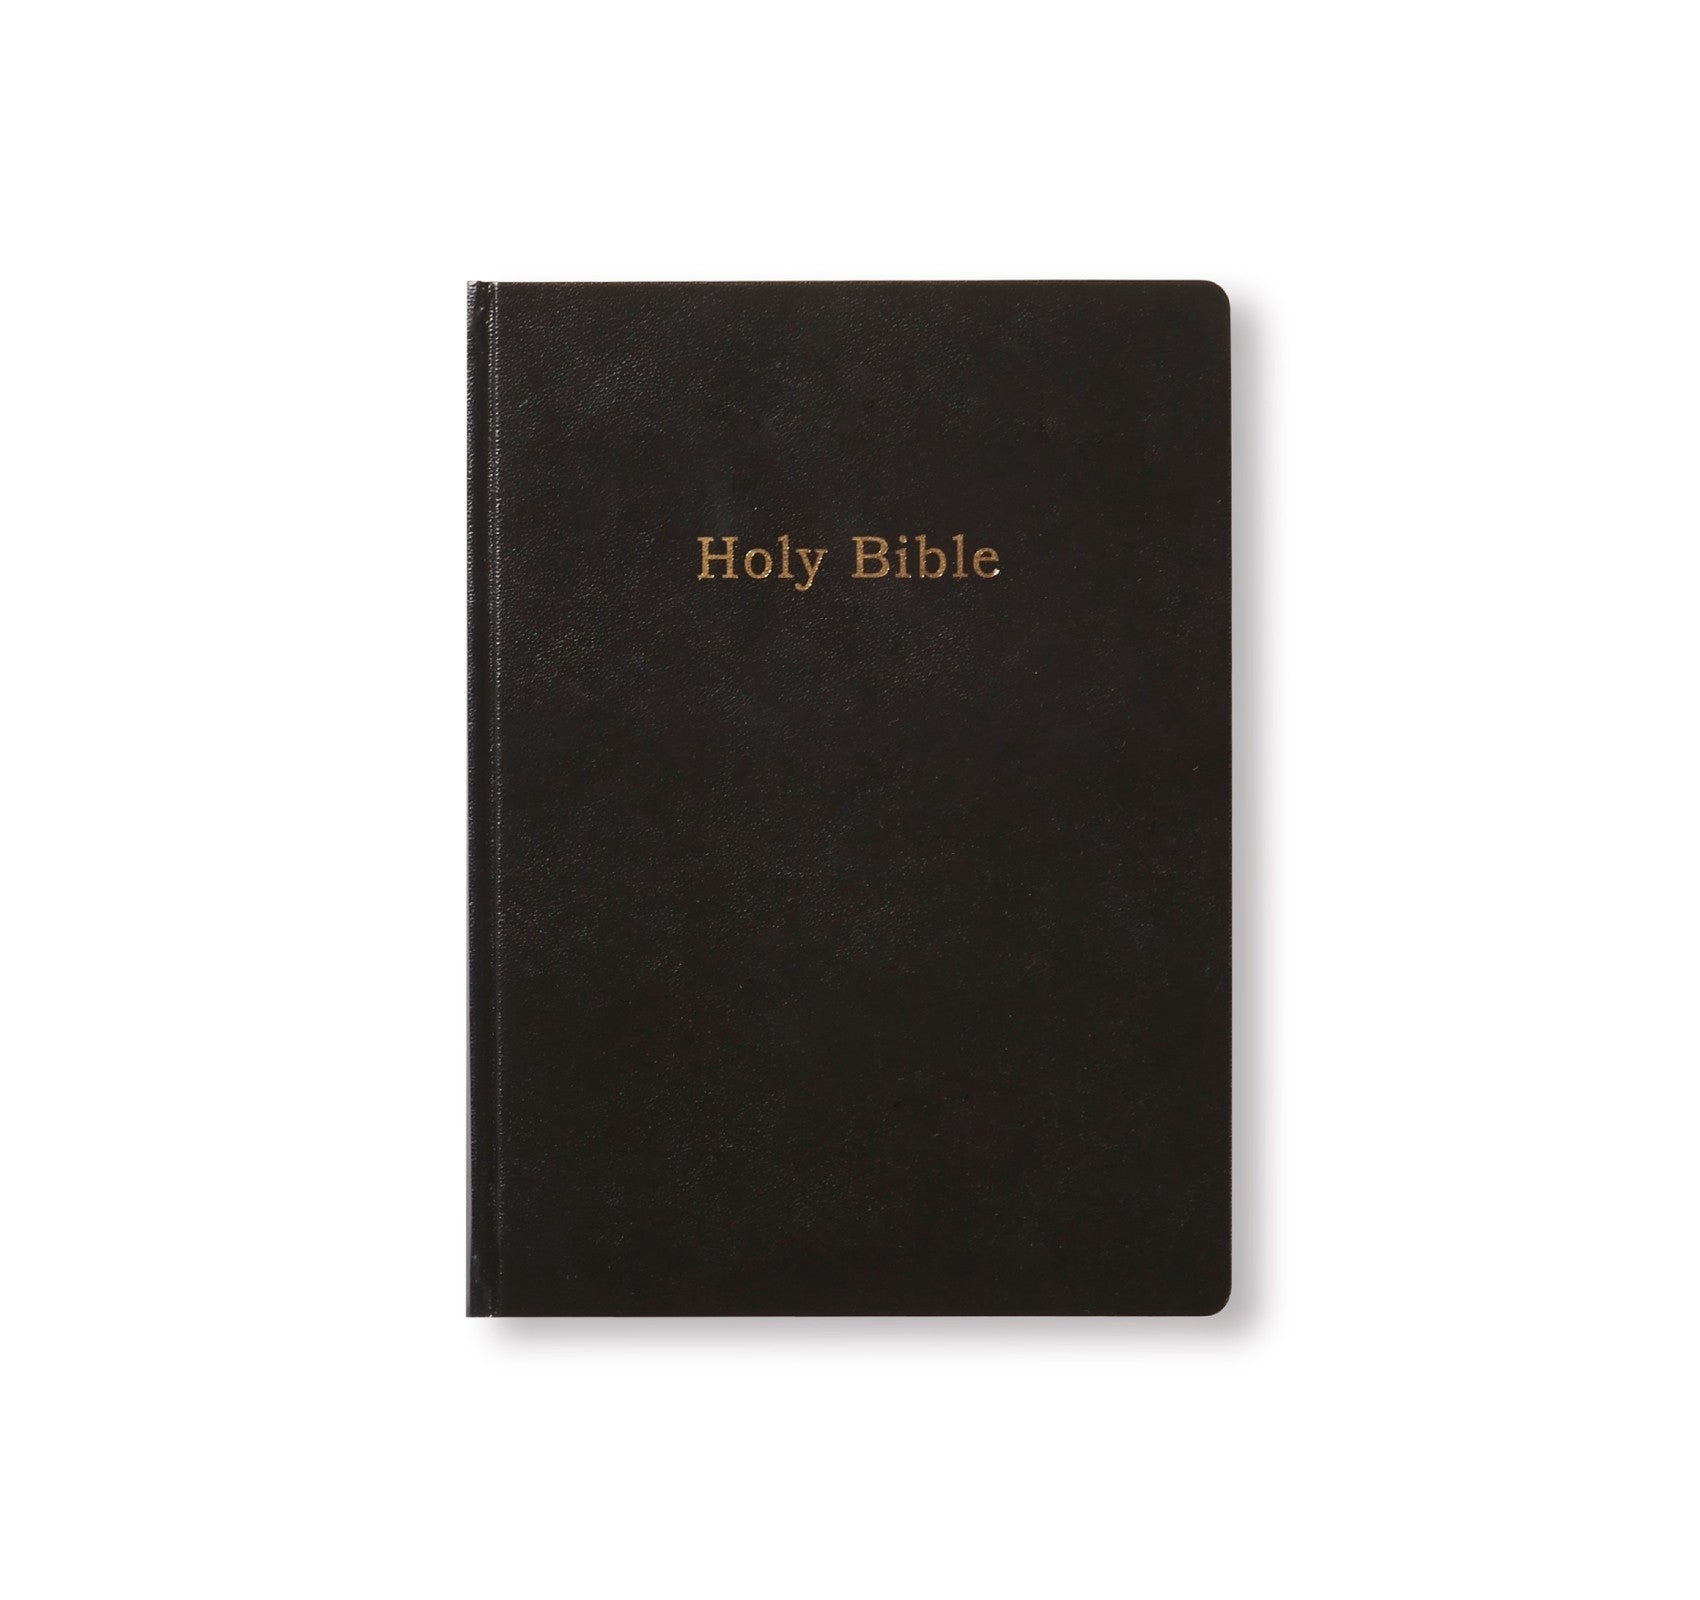 HOLY BIBLE by Adam Broomberg & Oliver Chanarin [FIRST EDITION, SECOND PRINTING]